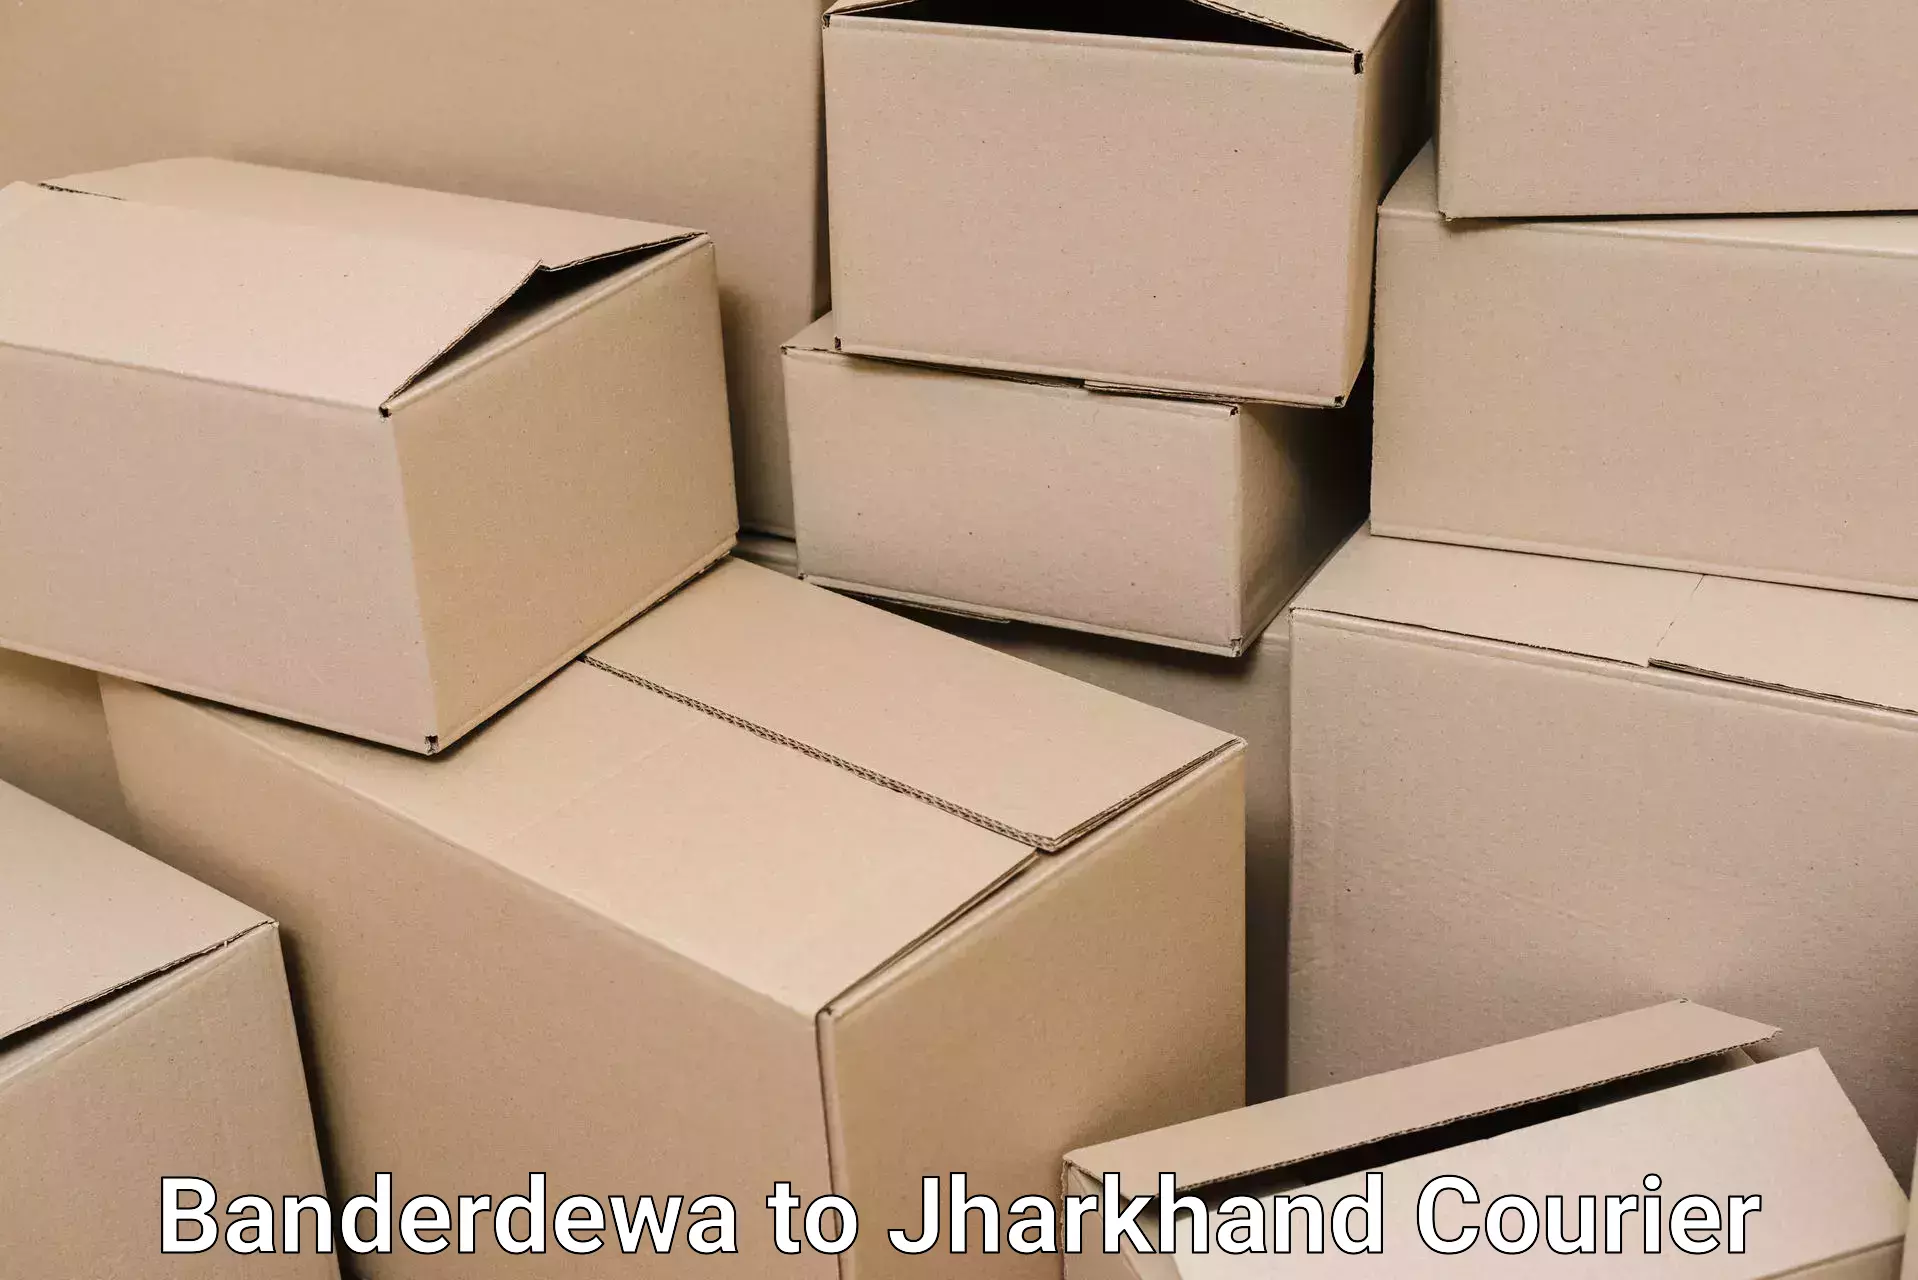 Professional packing services Banderdewa to Peterbar